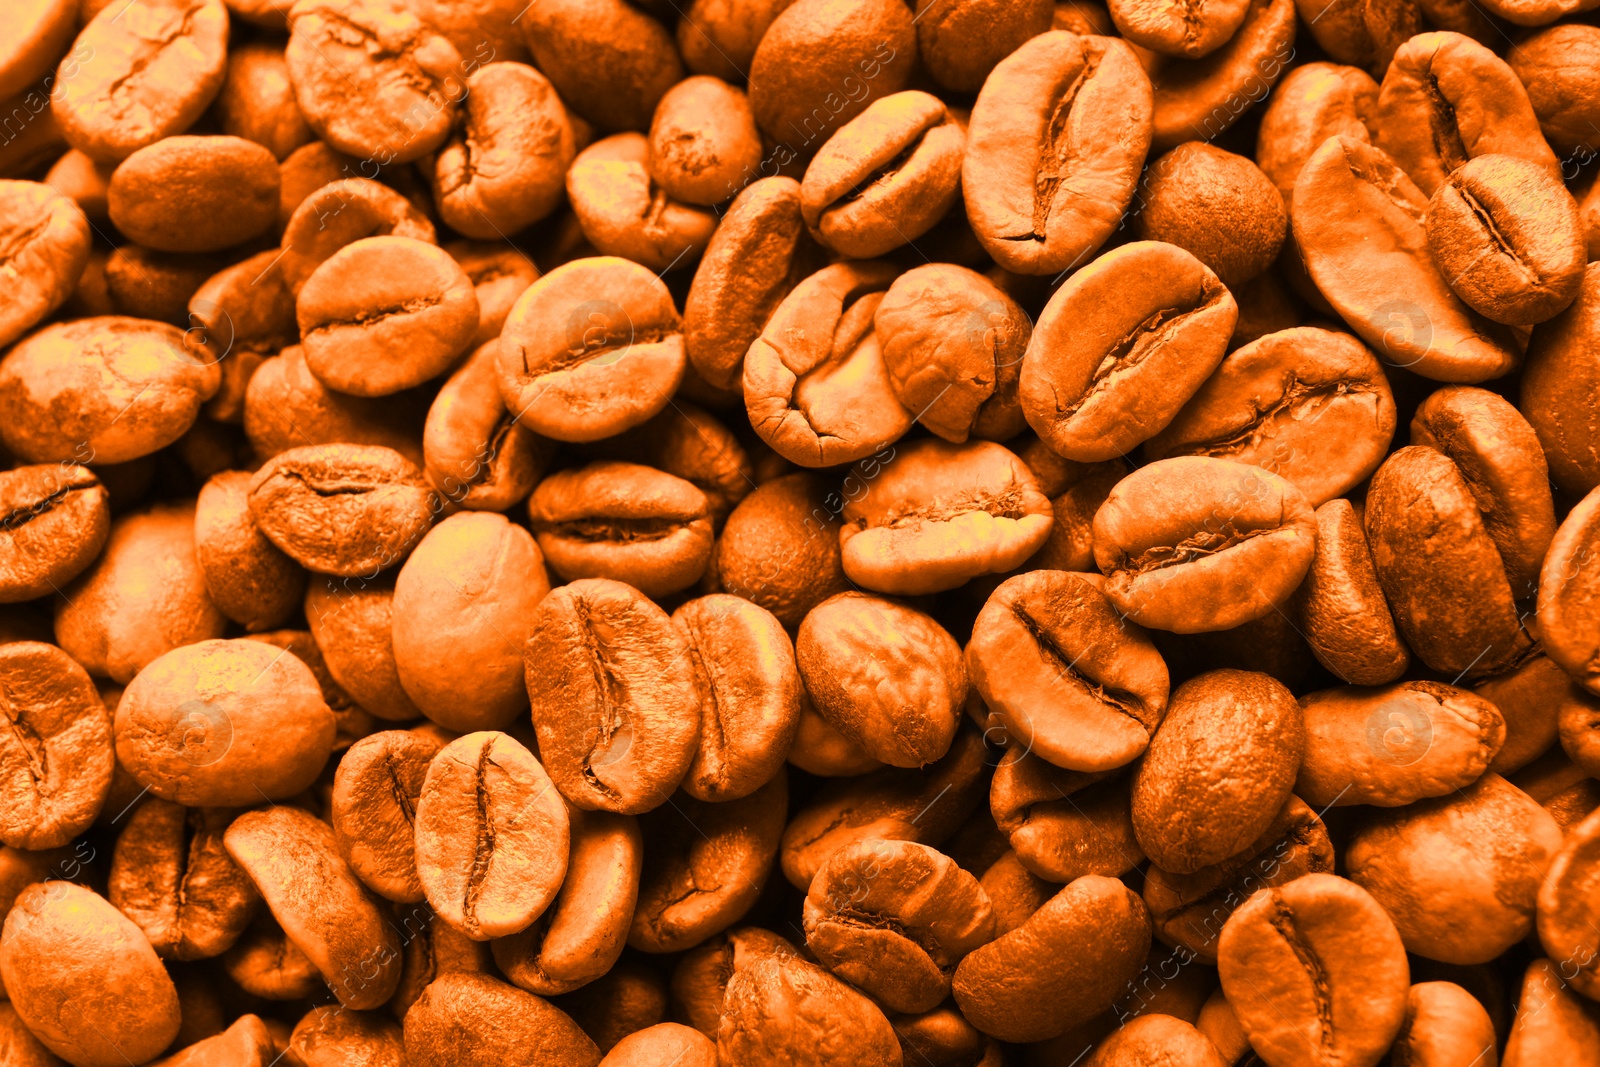 Image of Coffee beans as background, top view. Toned in orange